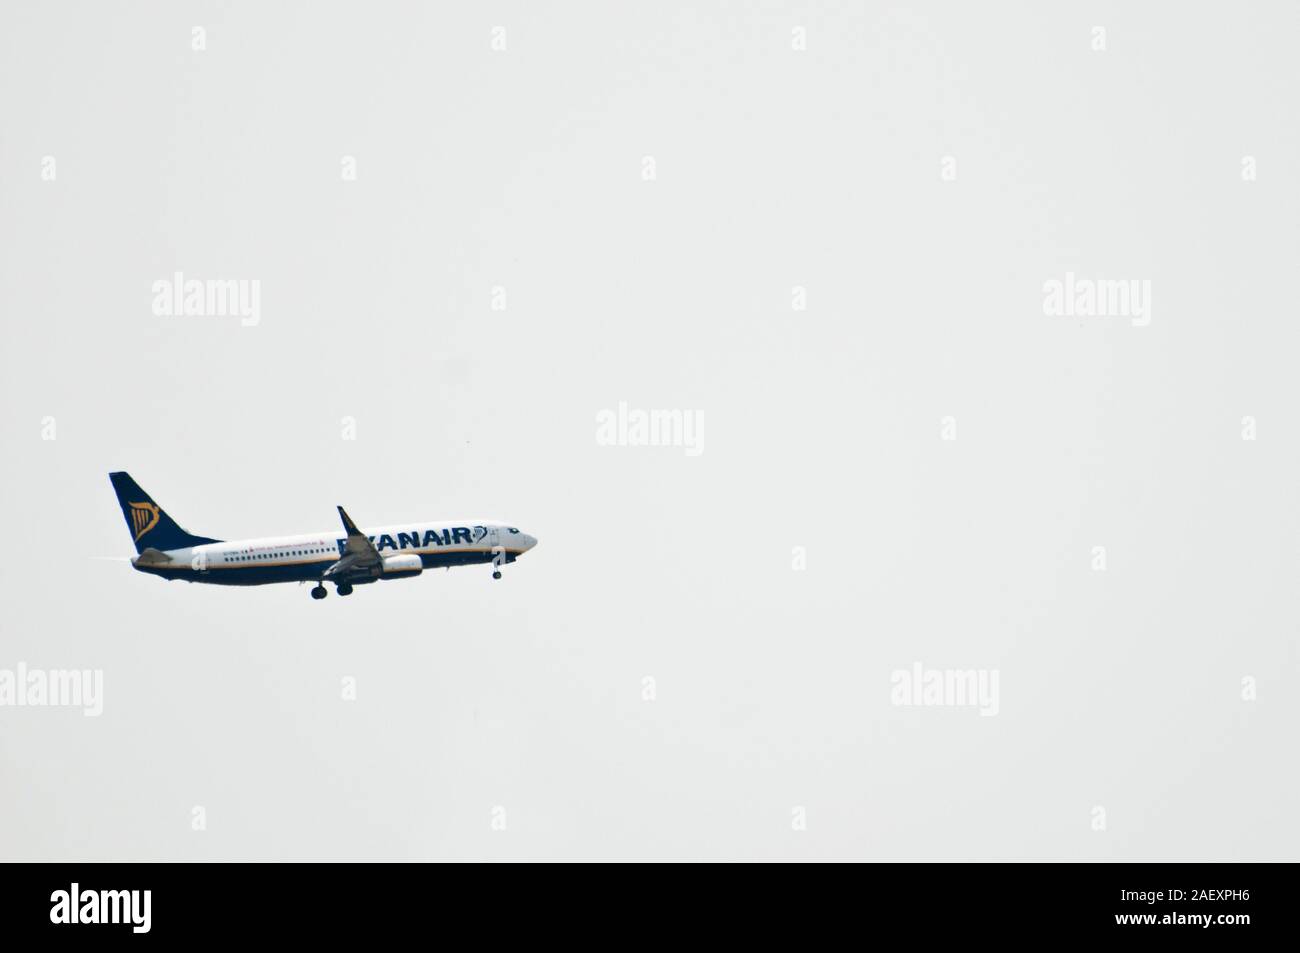 Rayanair Commercial Airplane Stockfoto